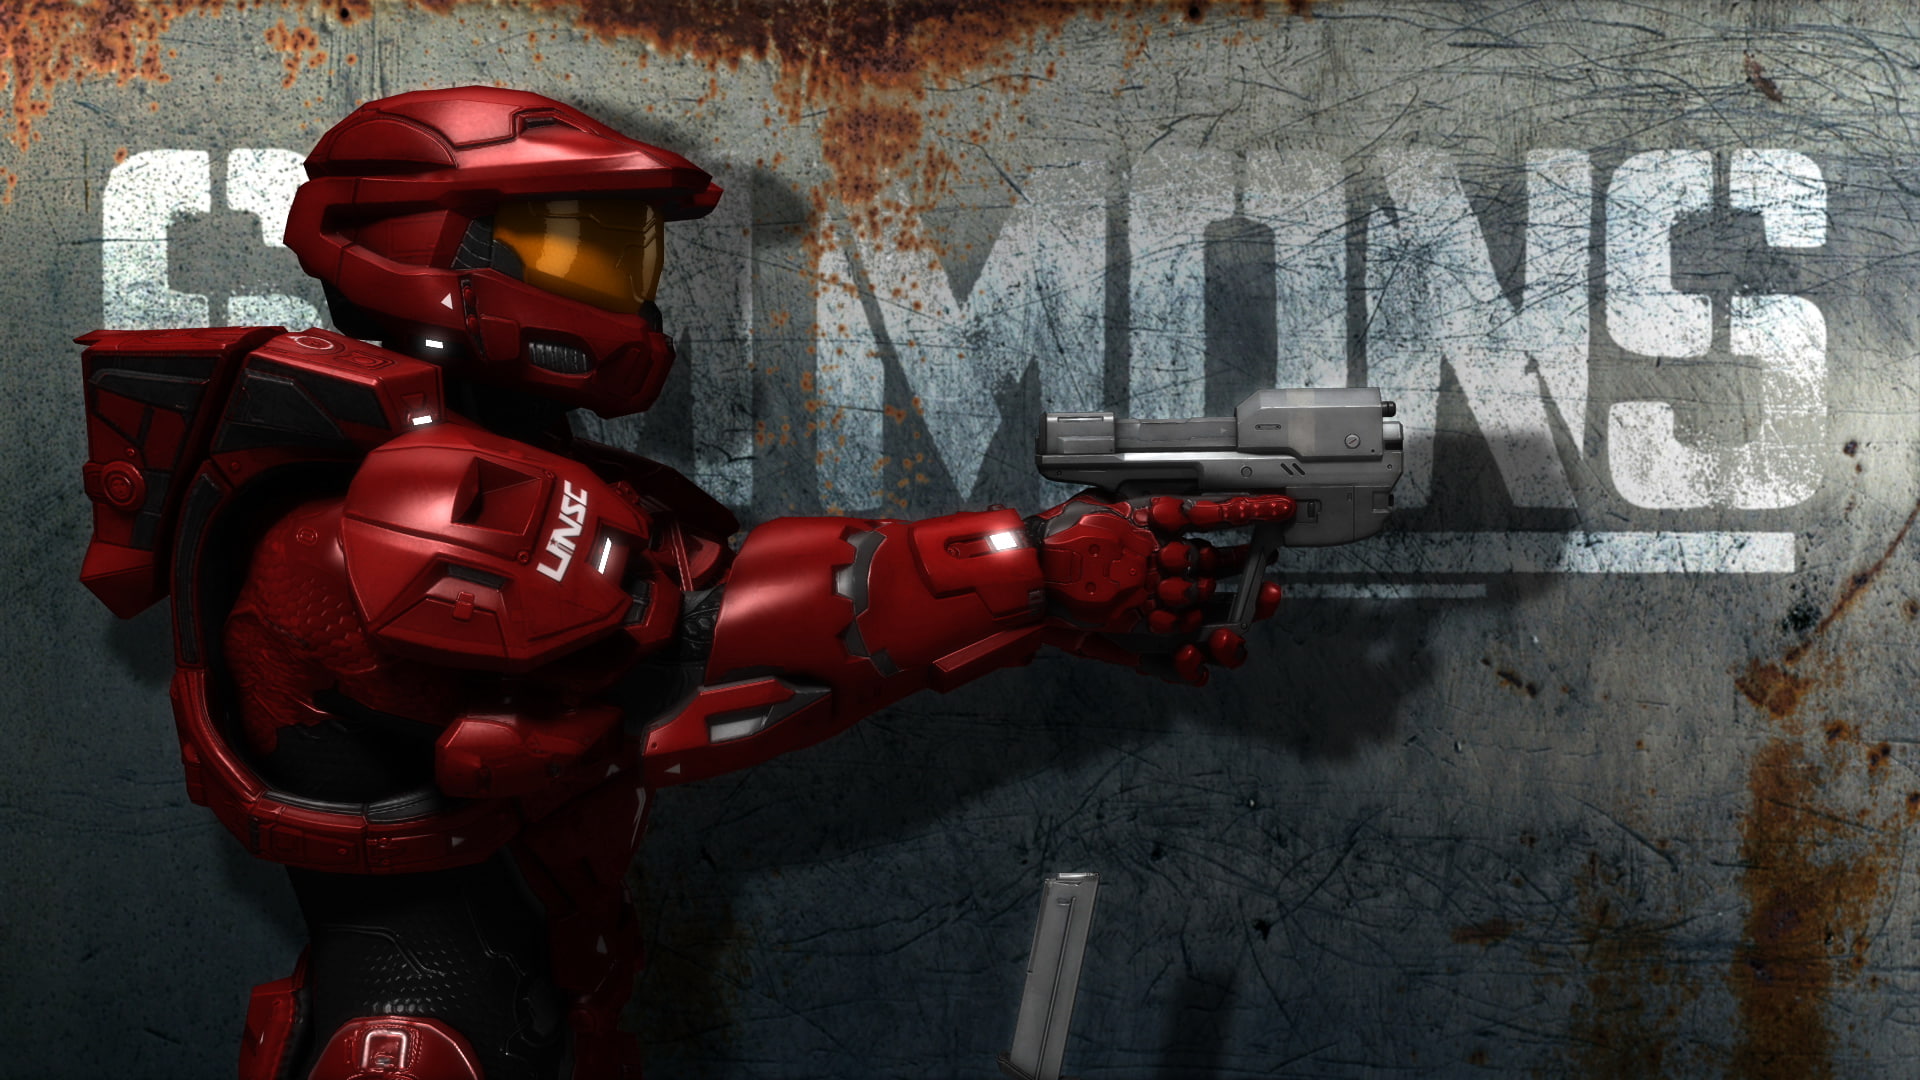 Red vs. Blue, artwork, Halo, video games, wall - building feature